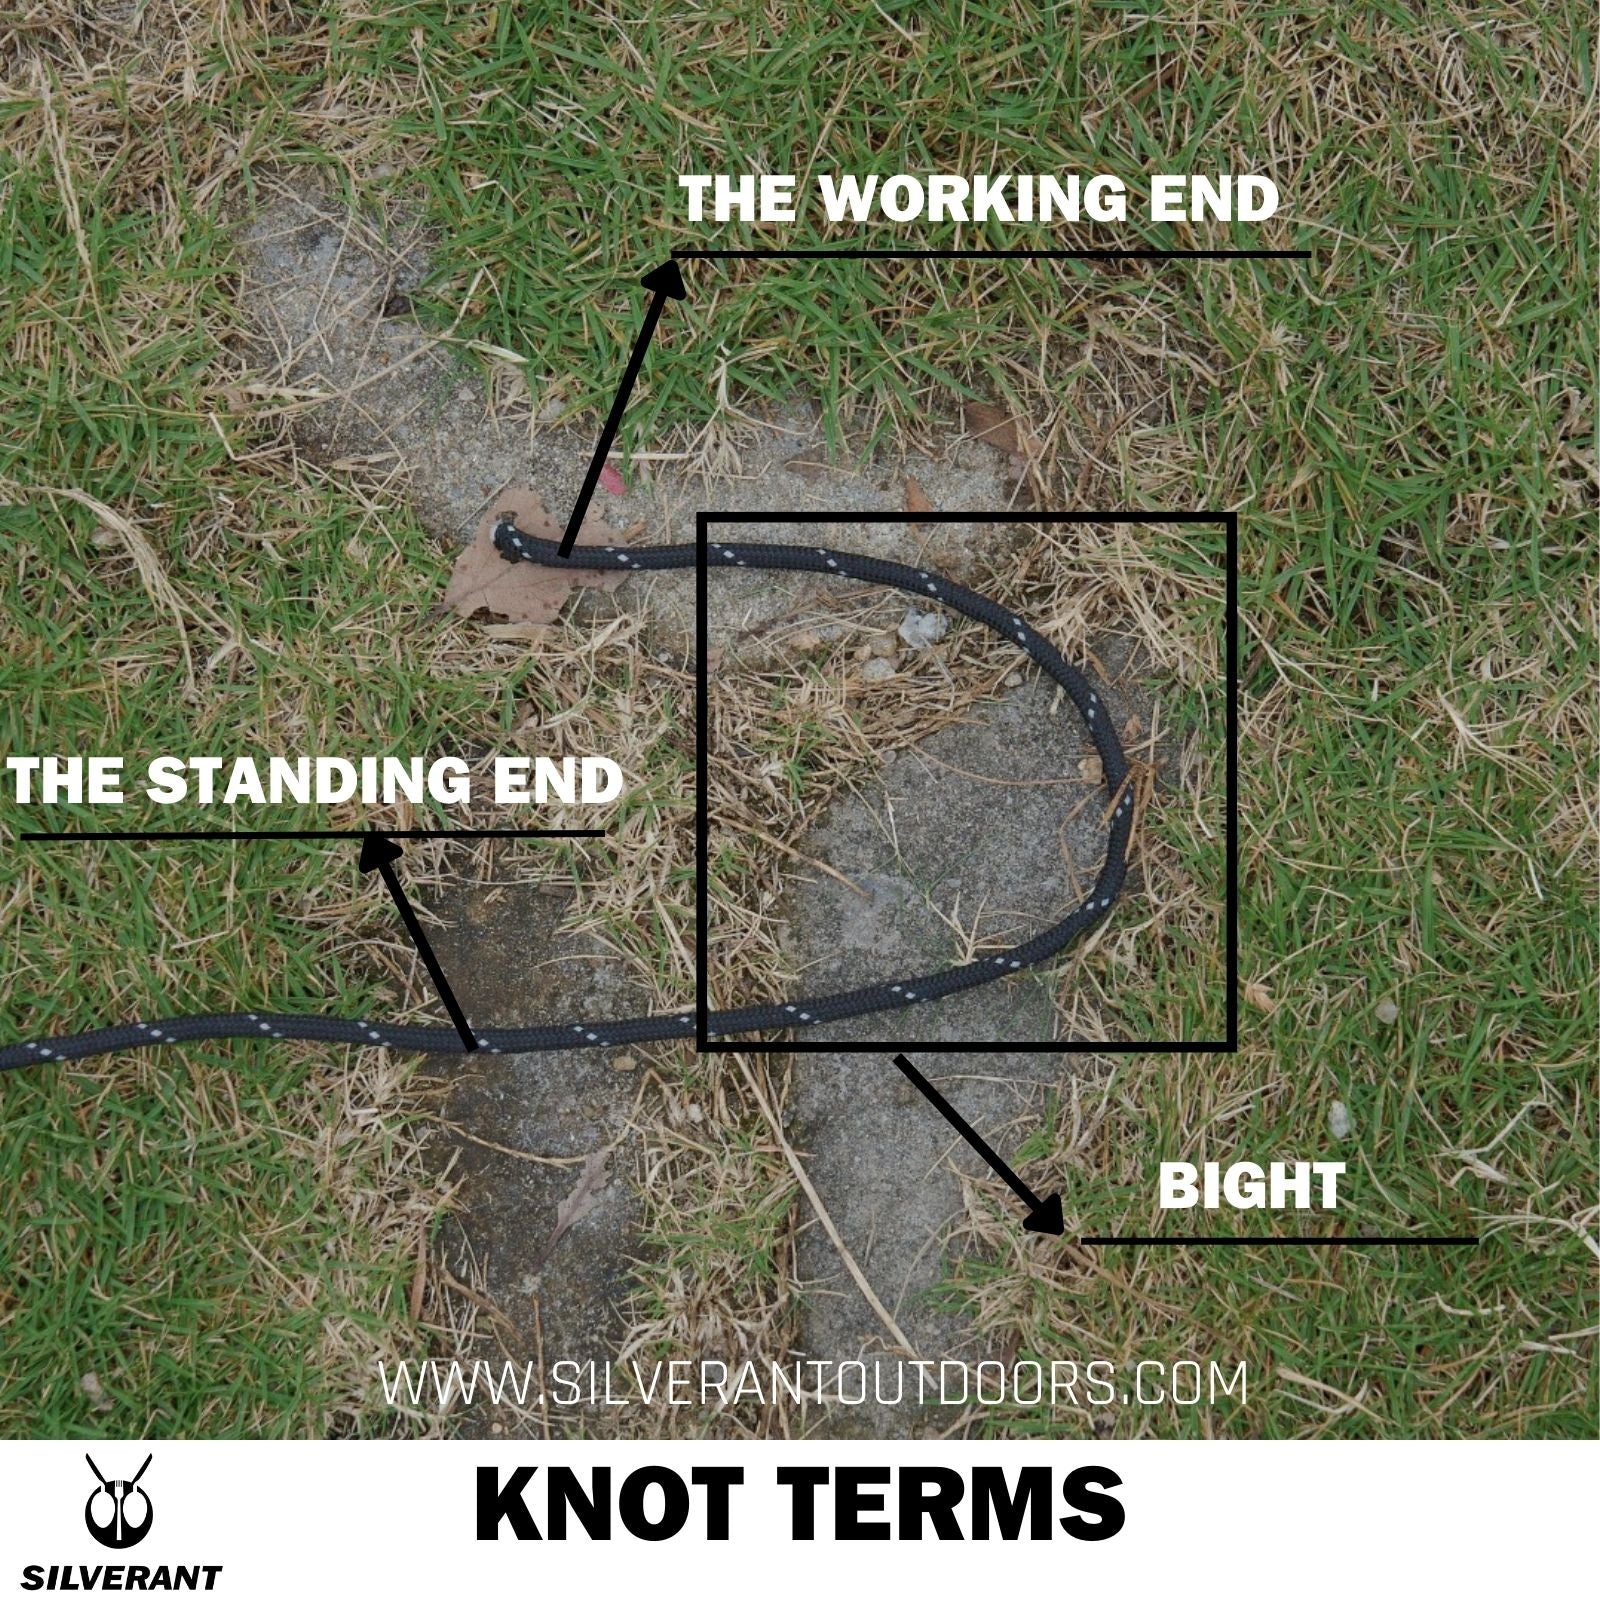 Knots 101: Essential Knots Every Outdoor Enthusiast Should Know